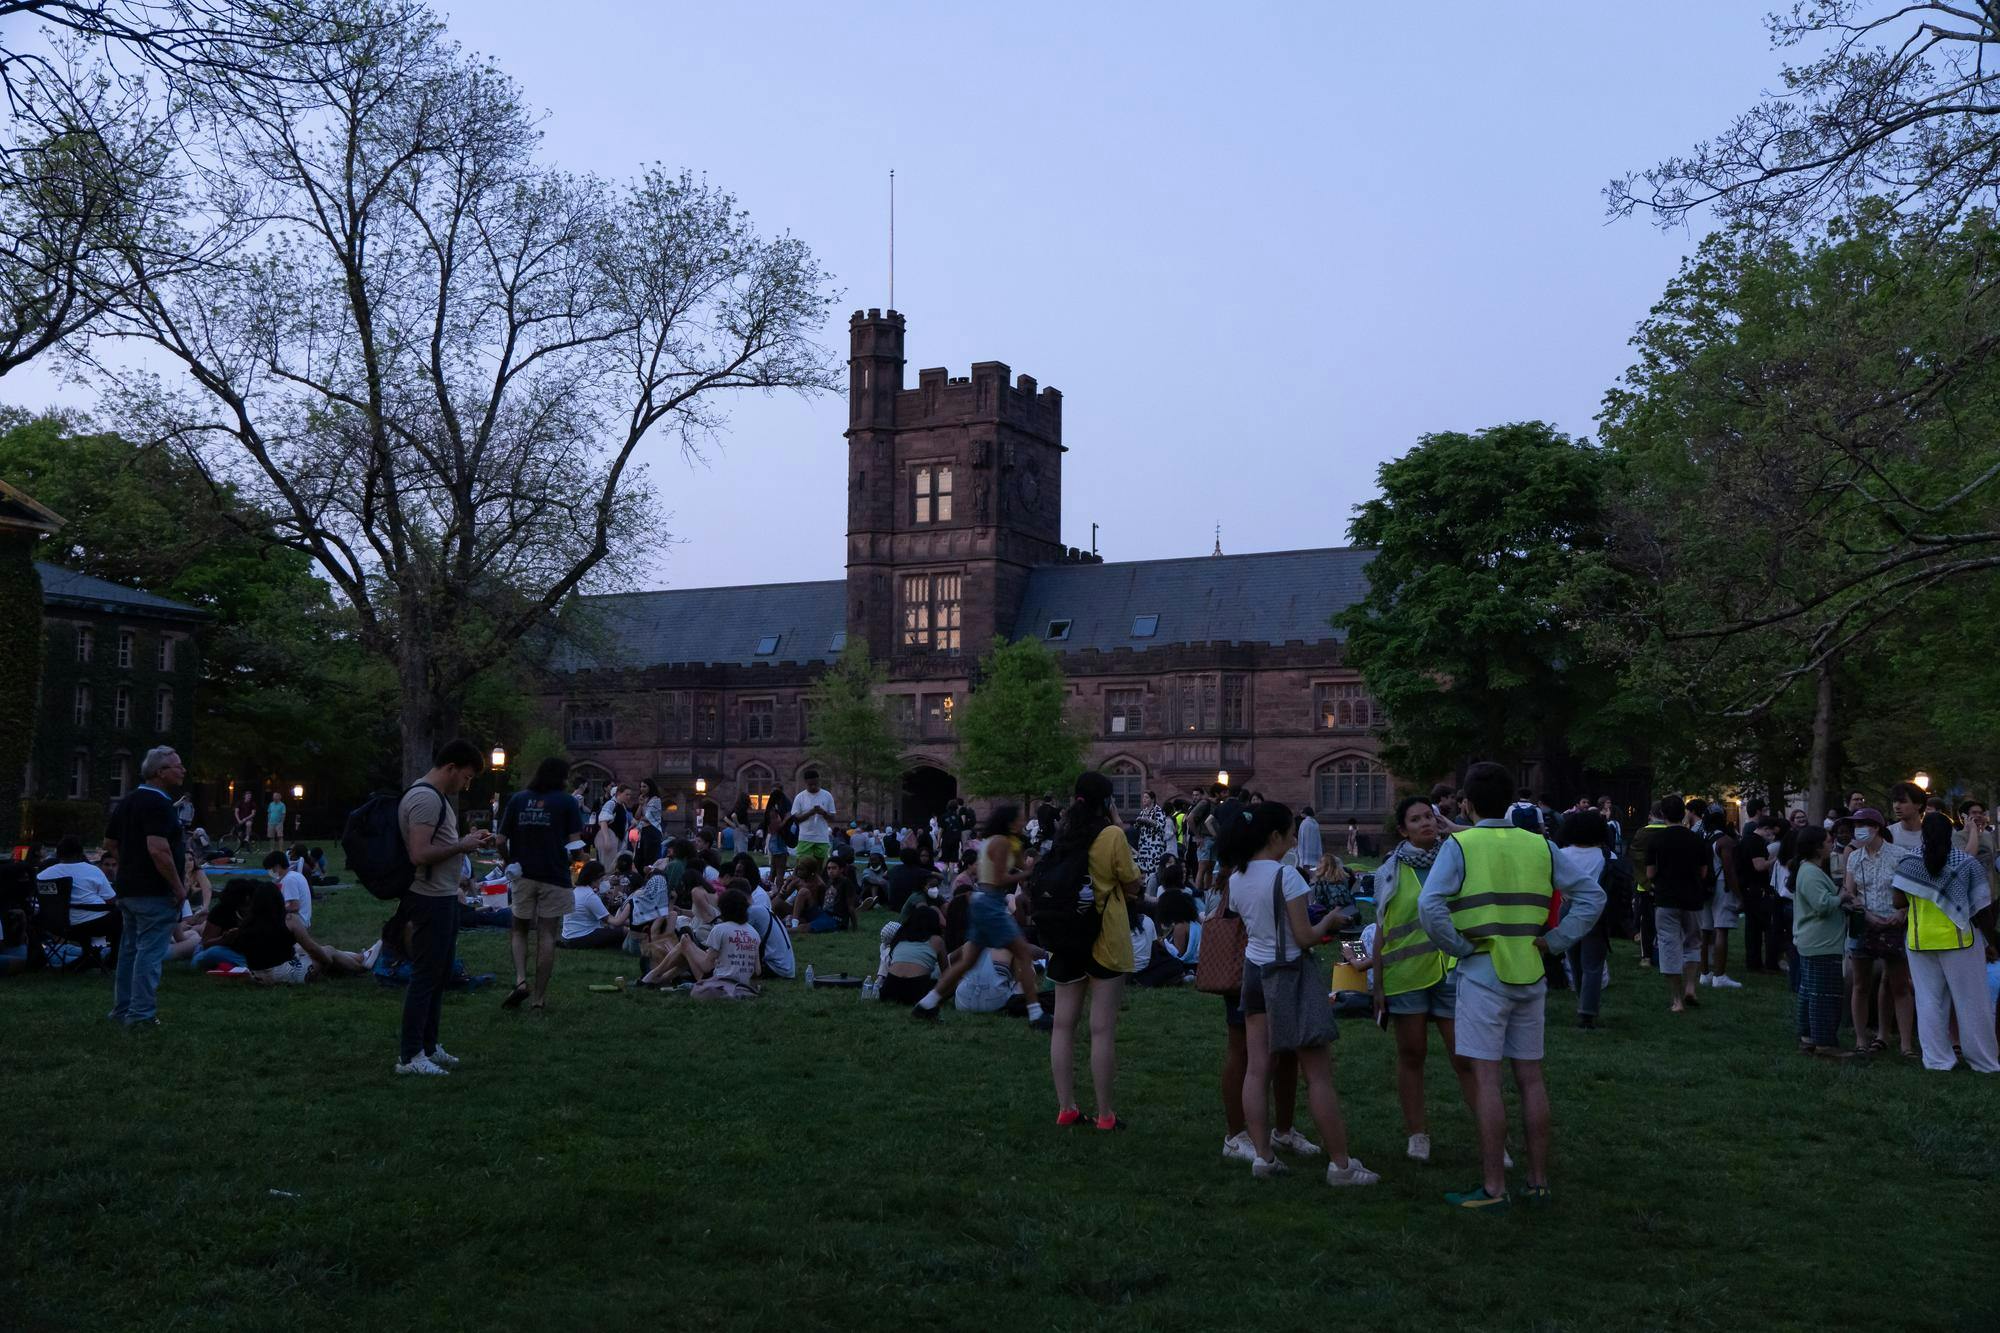 People gather on lawn in front of brownish-red brick building.